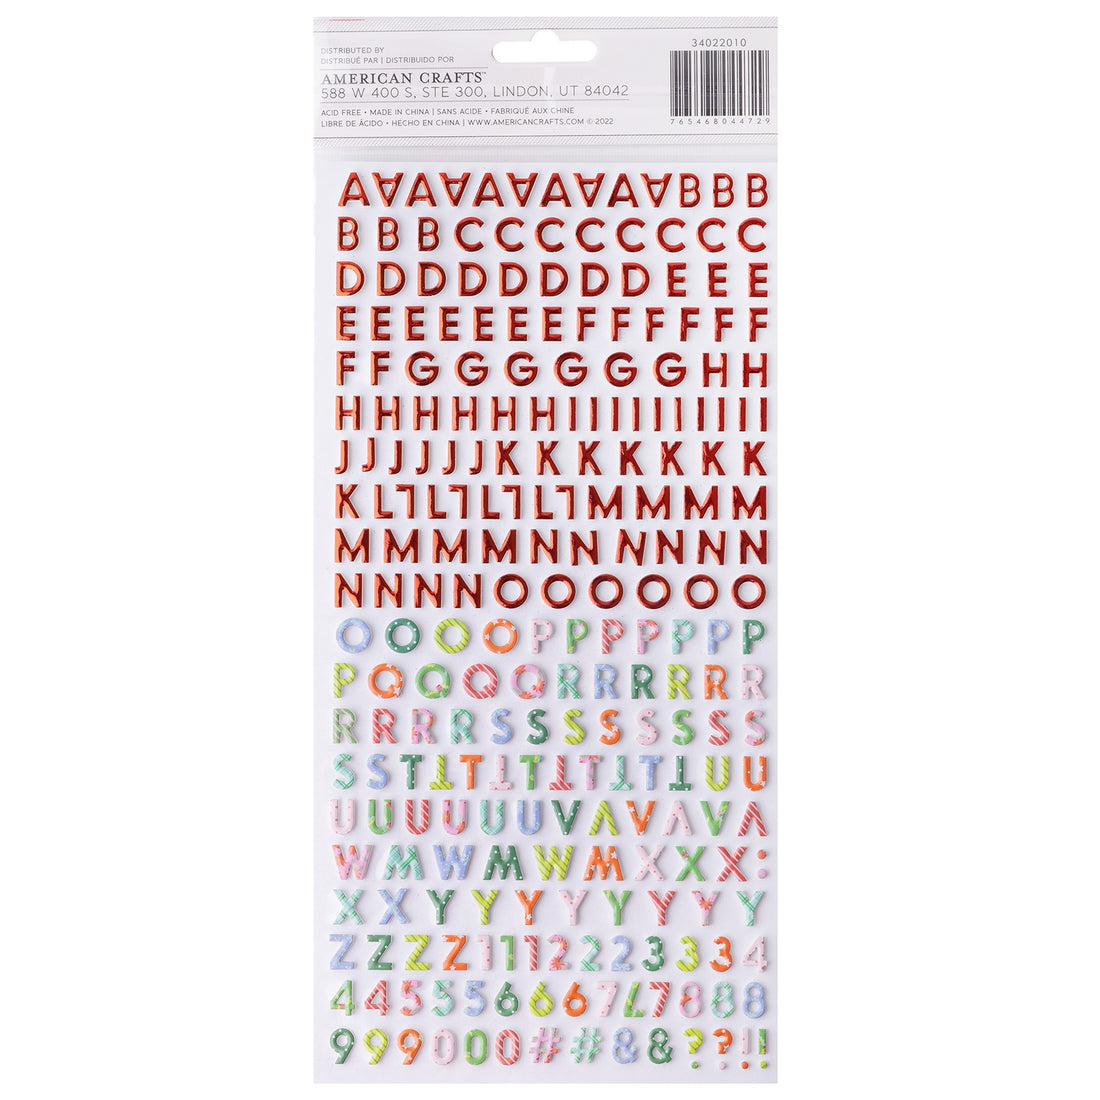 THICKERS Paige Evans SUGARPLUM WISHES Foam Foil Letter Stickers